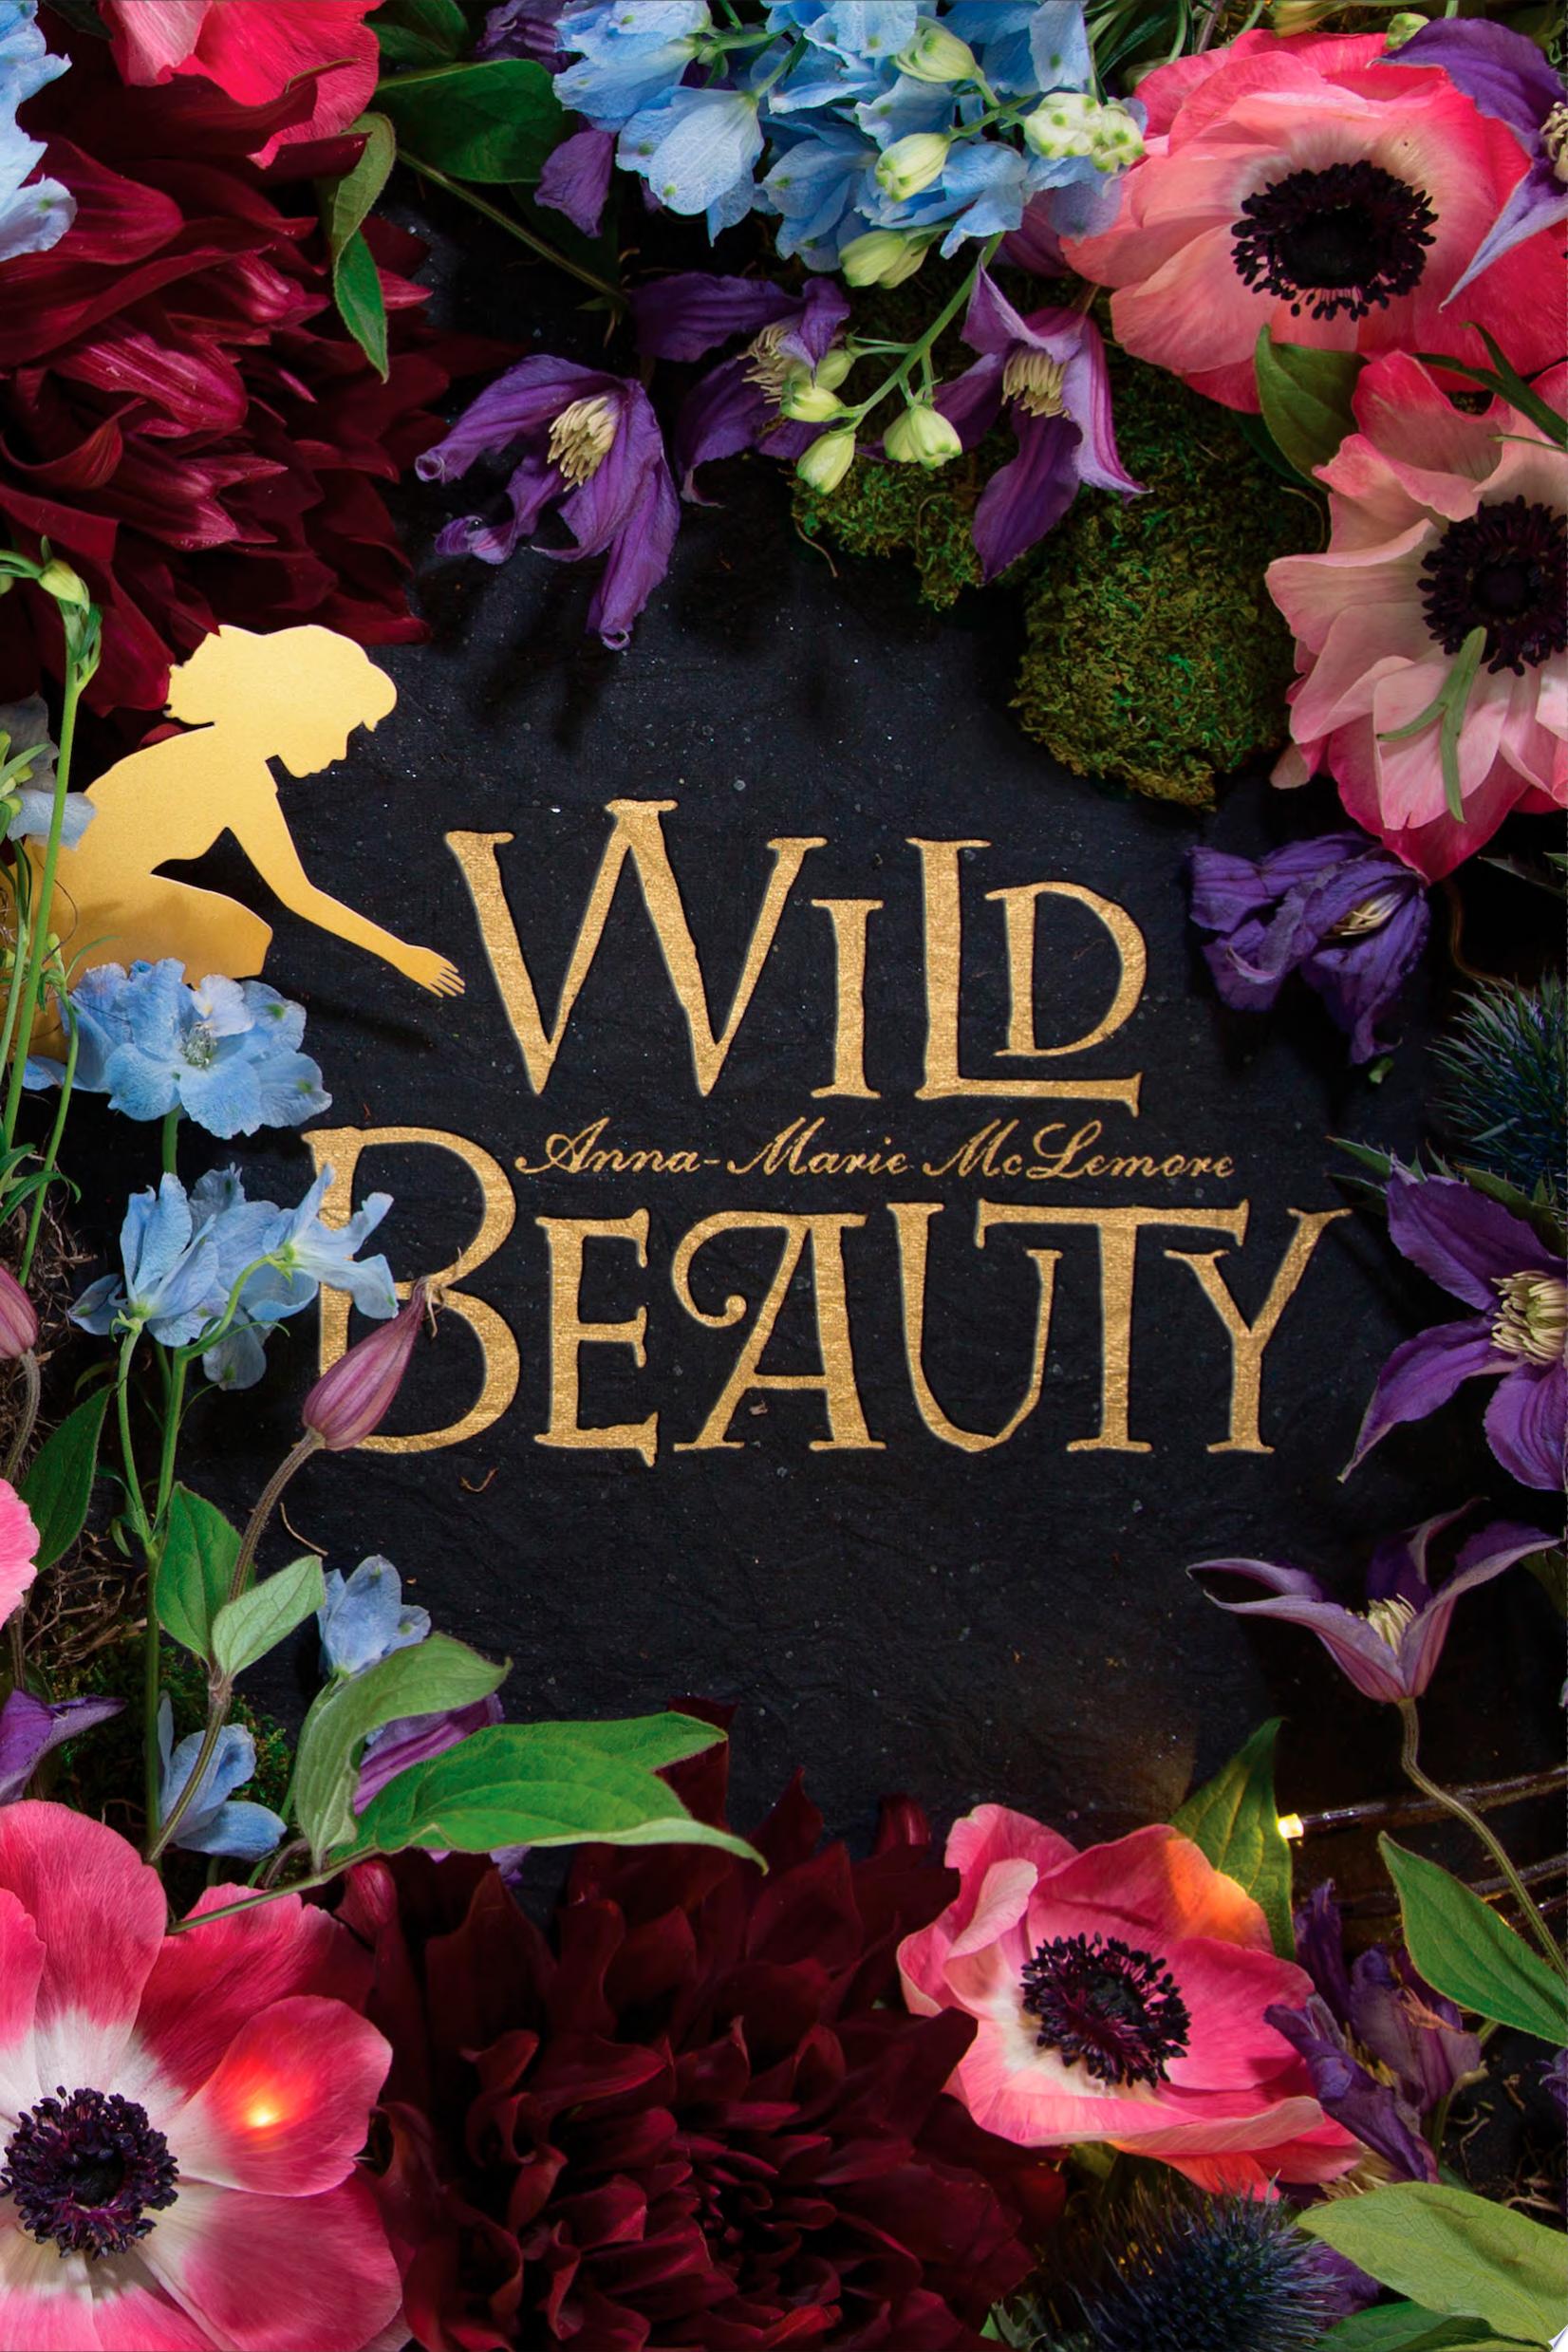 Image for "Wild Beauty"